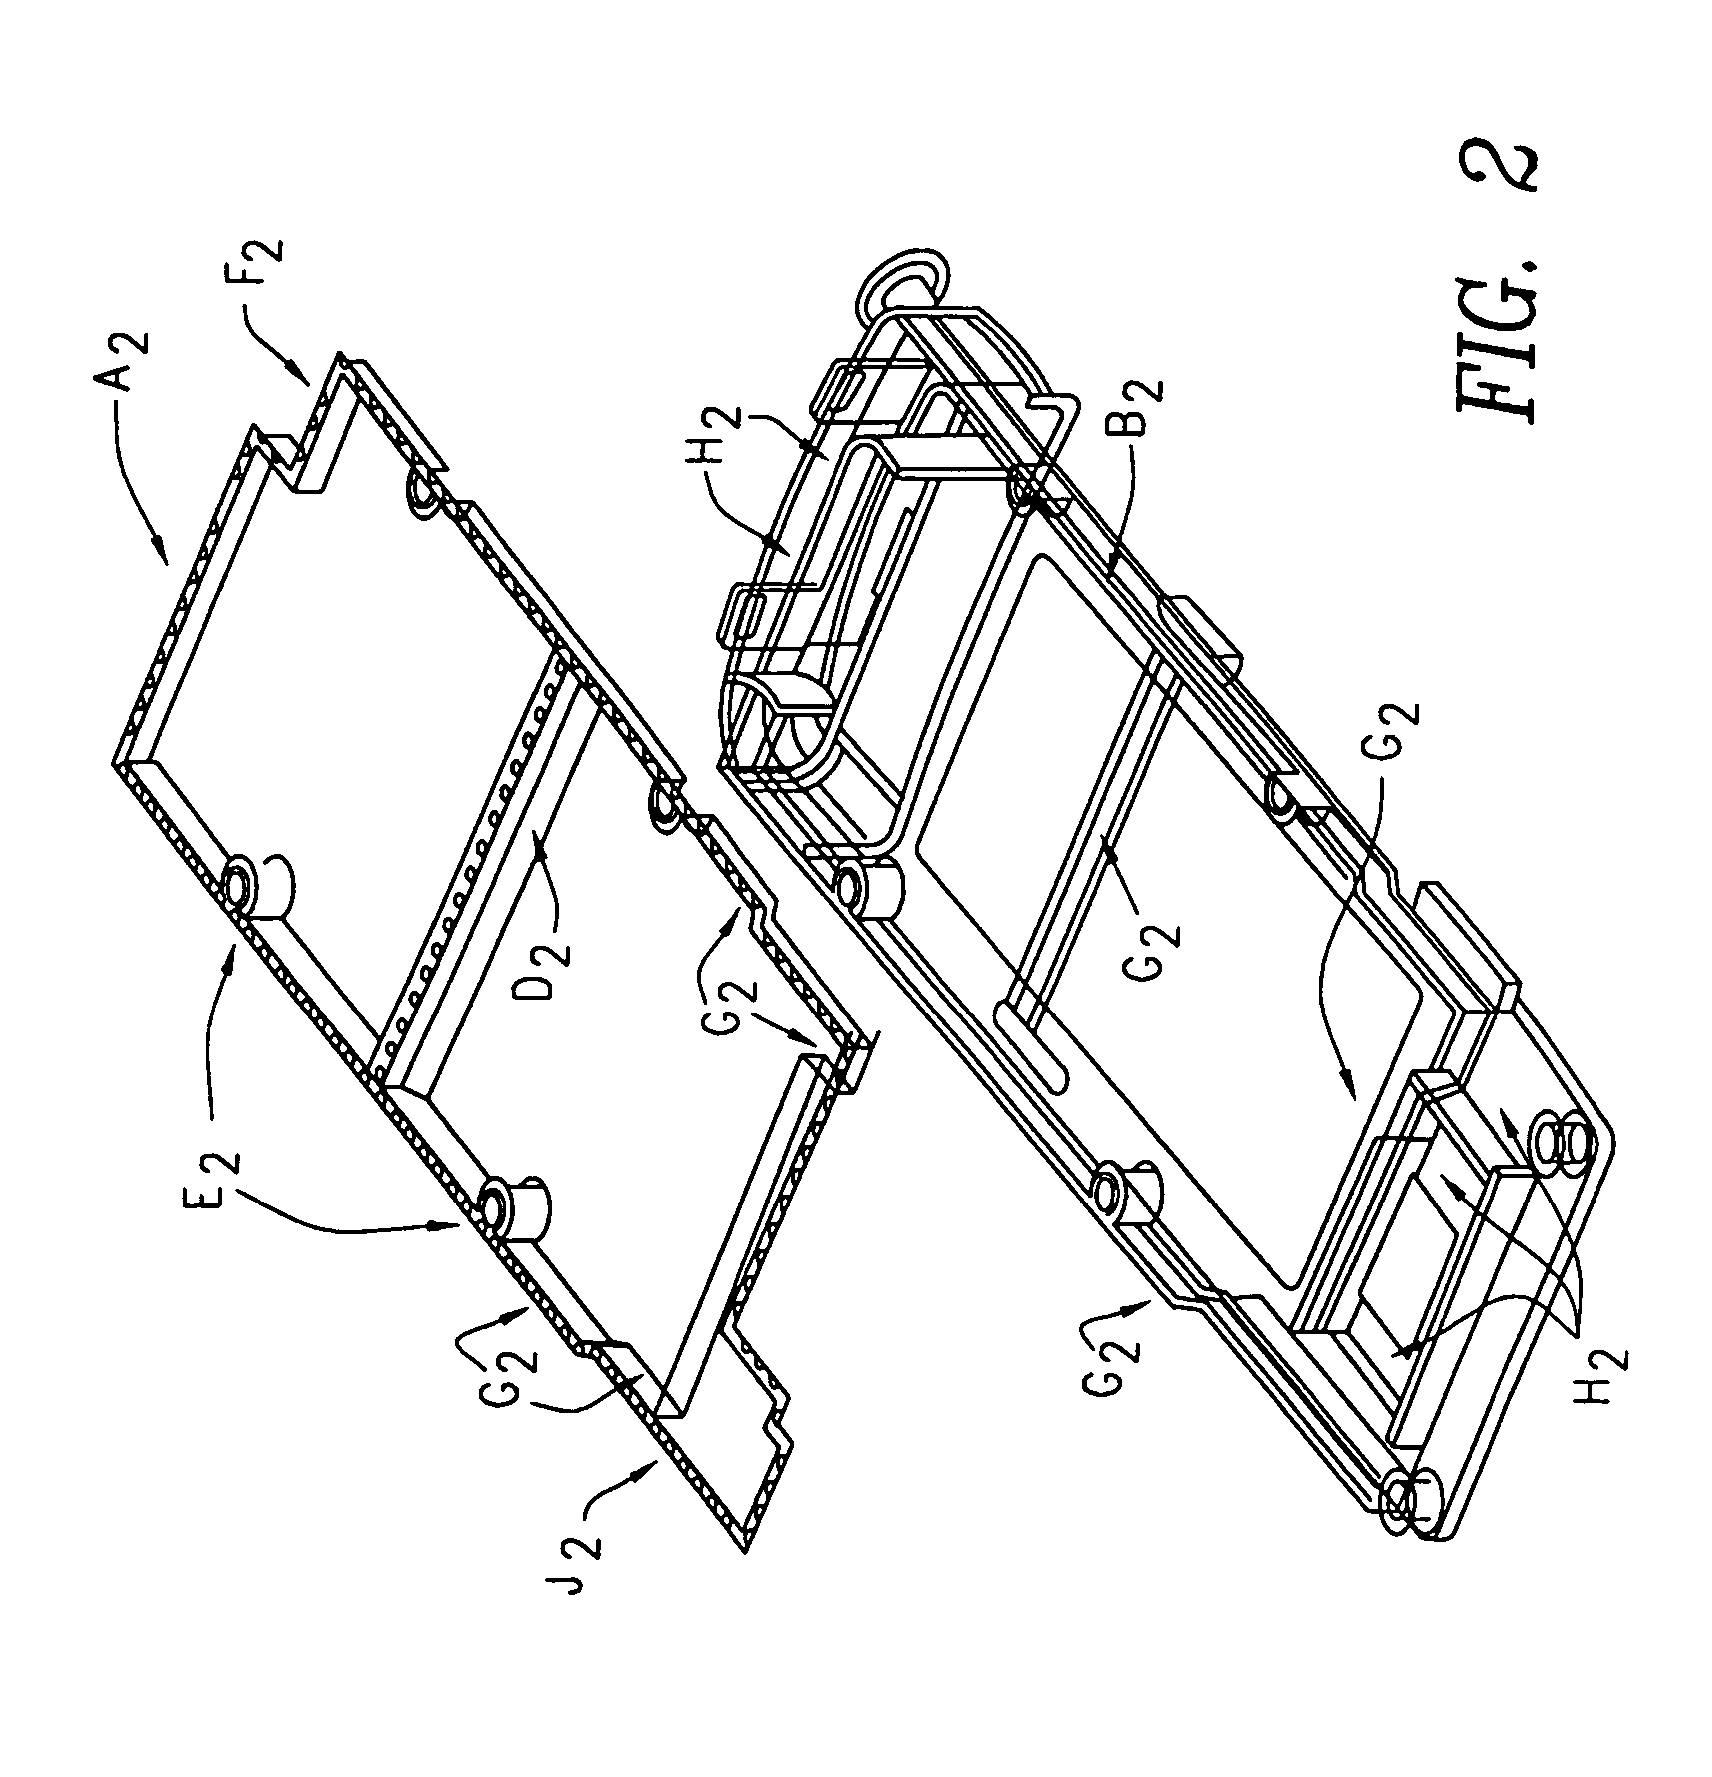 Conforming shielded form for electronic component assemblies and methods for making and using same